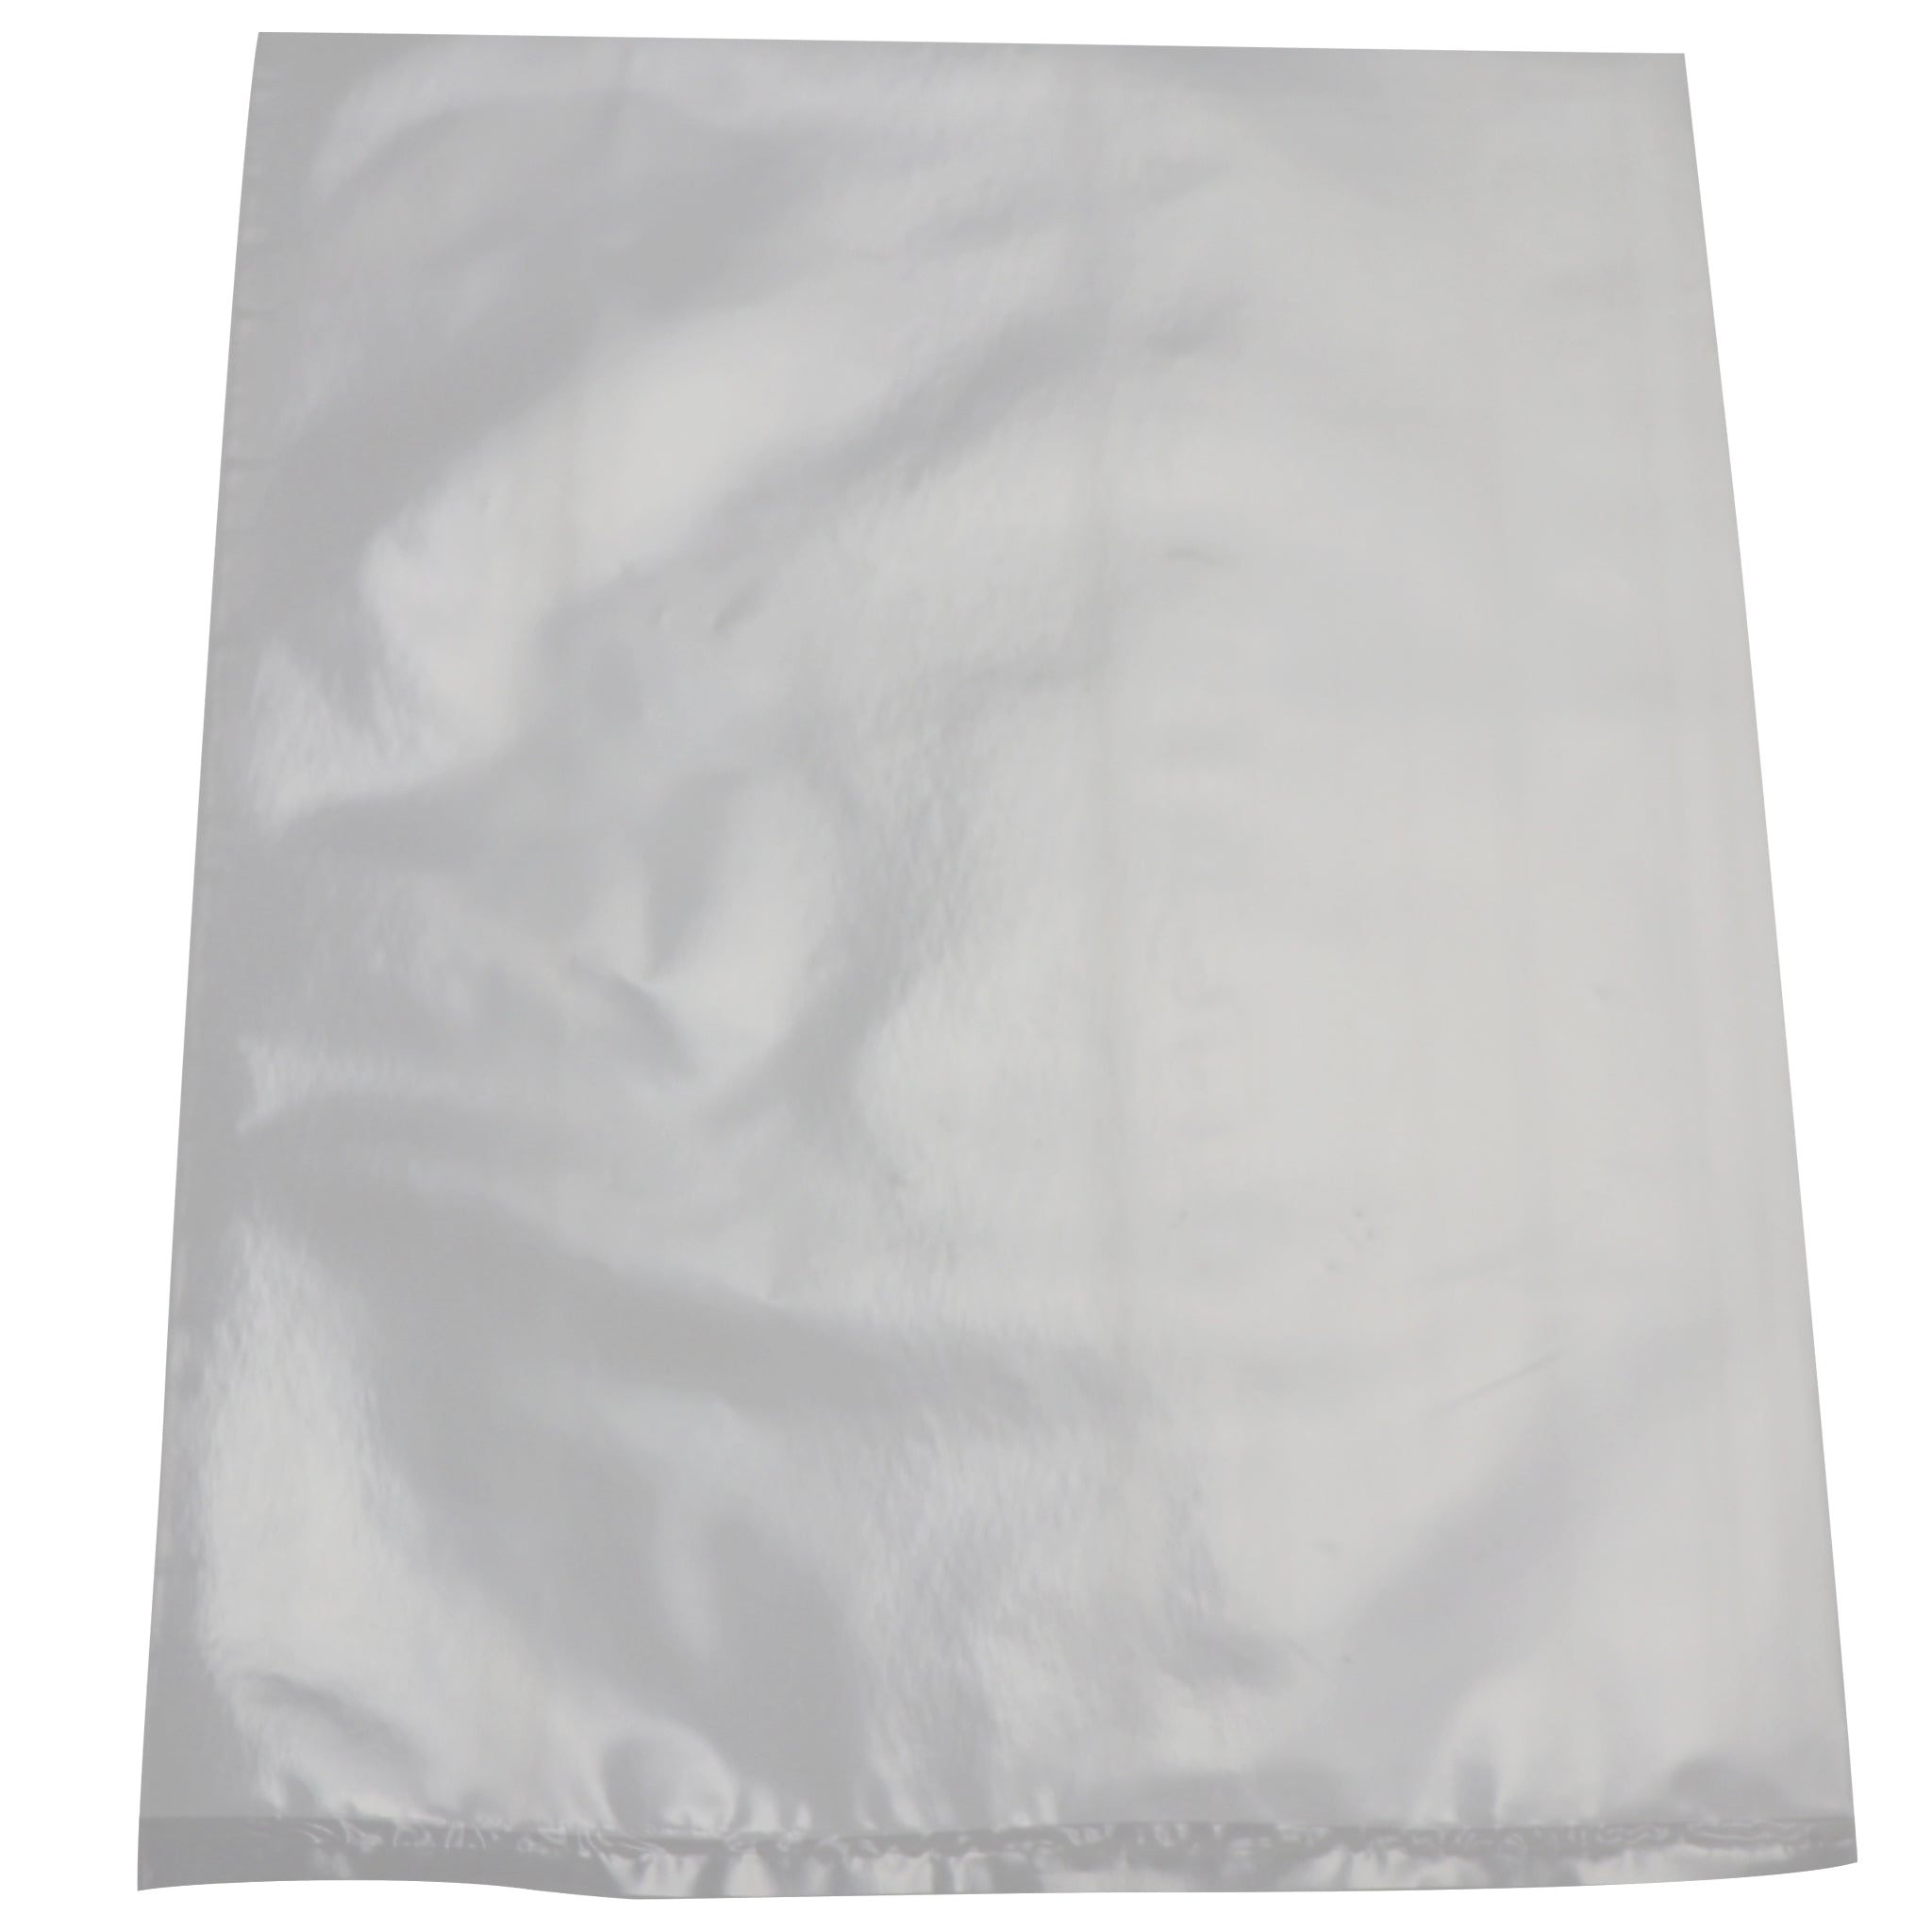 50 Poly Meat Bags - Plain White 1 Lb Capacity Bags